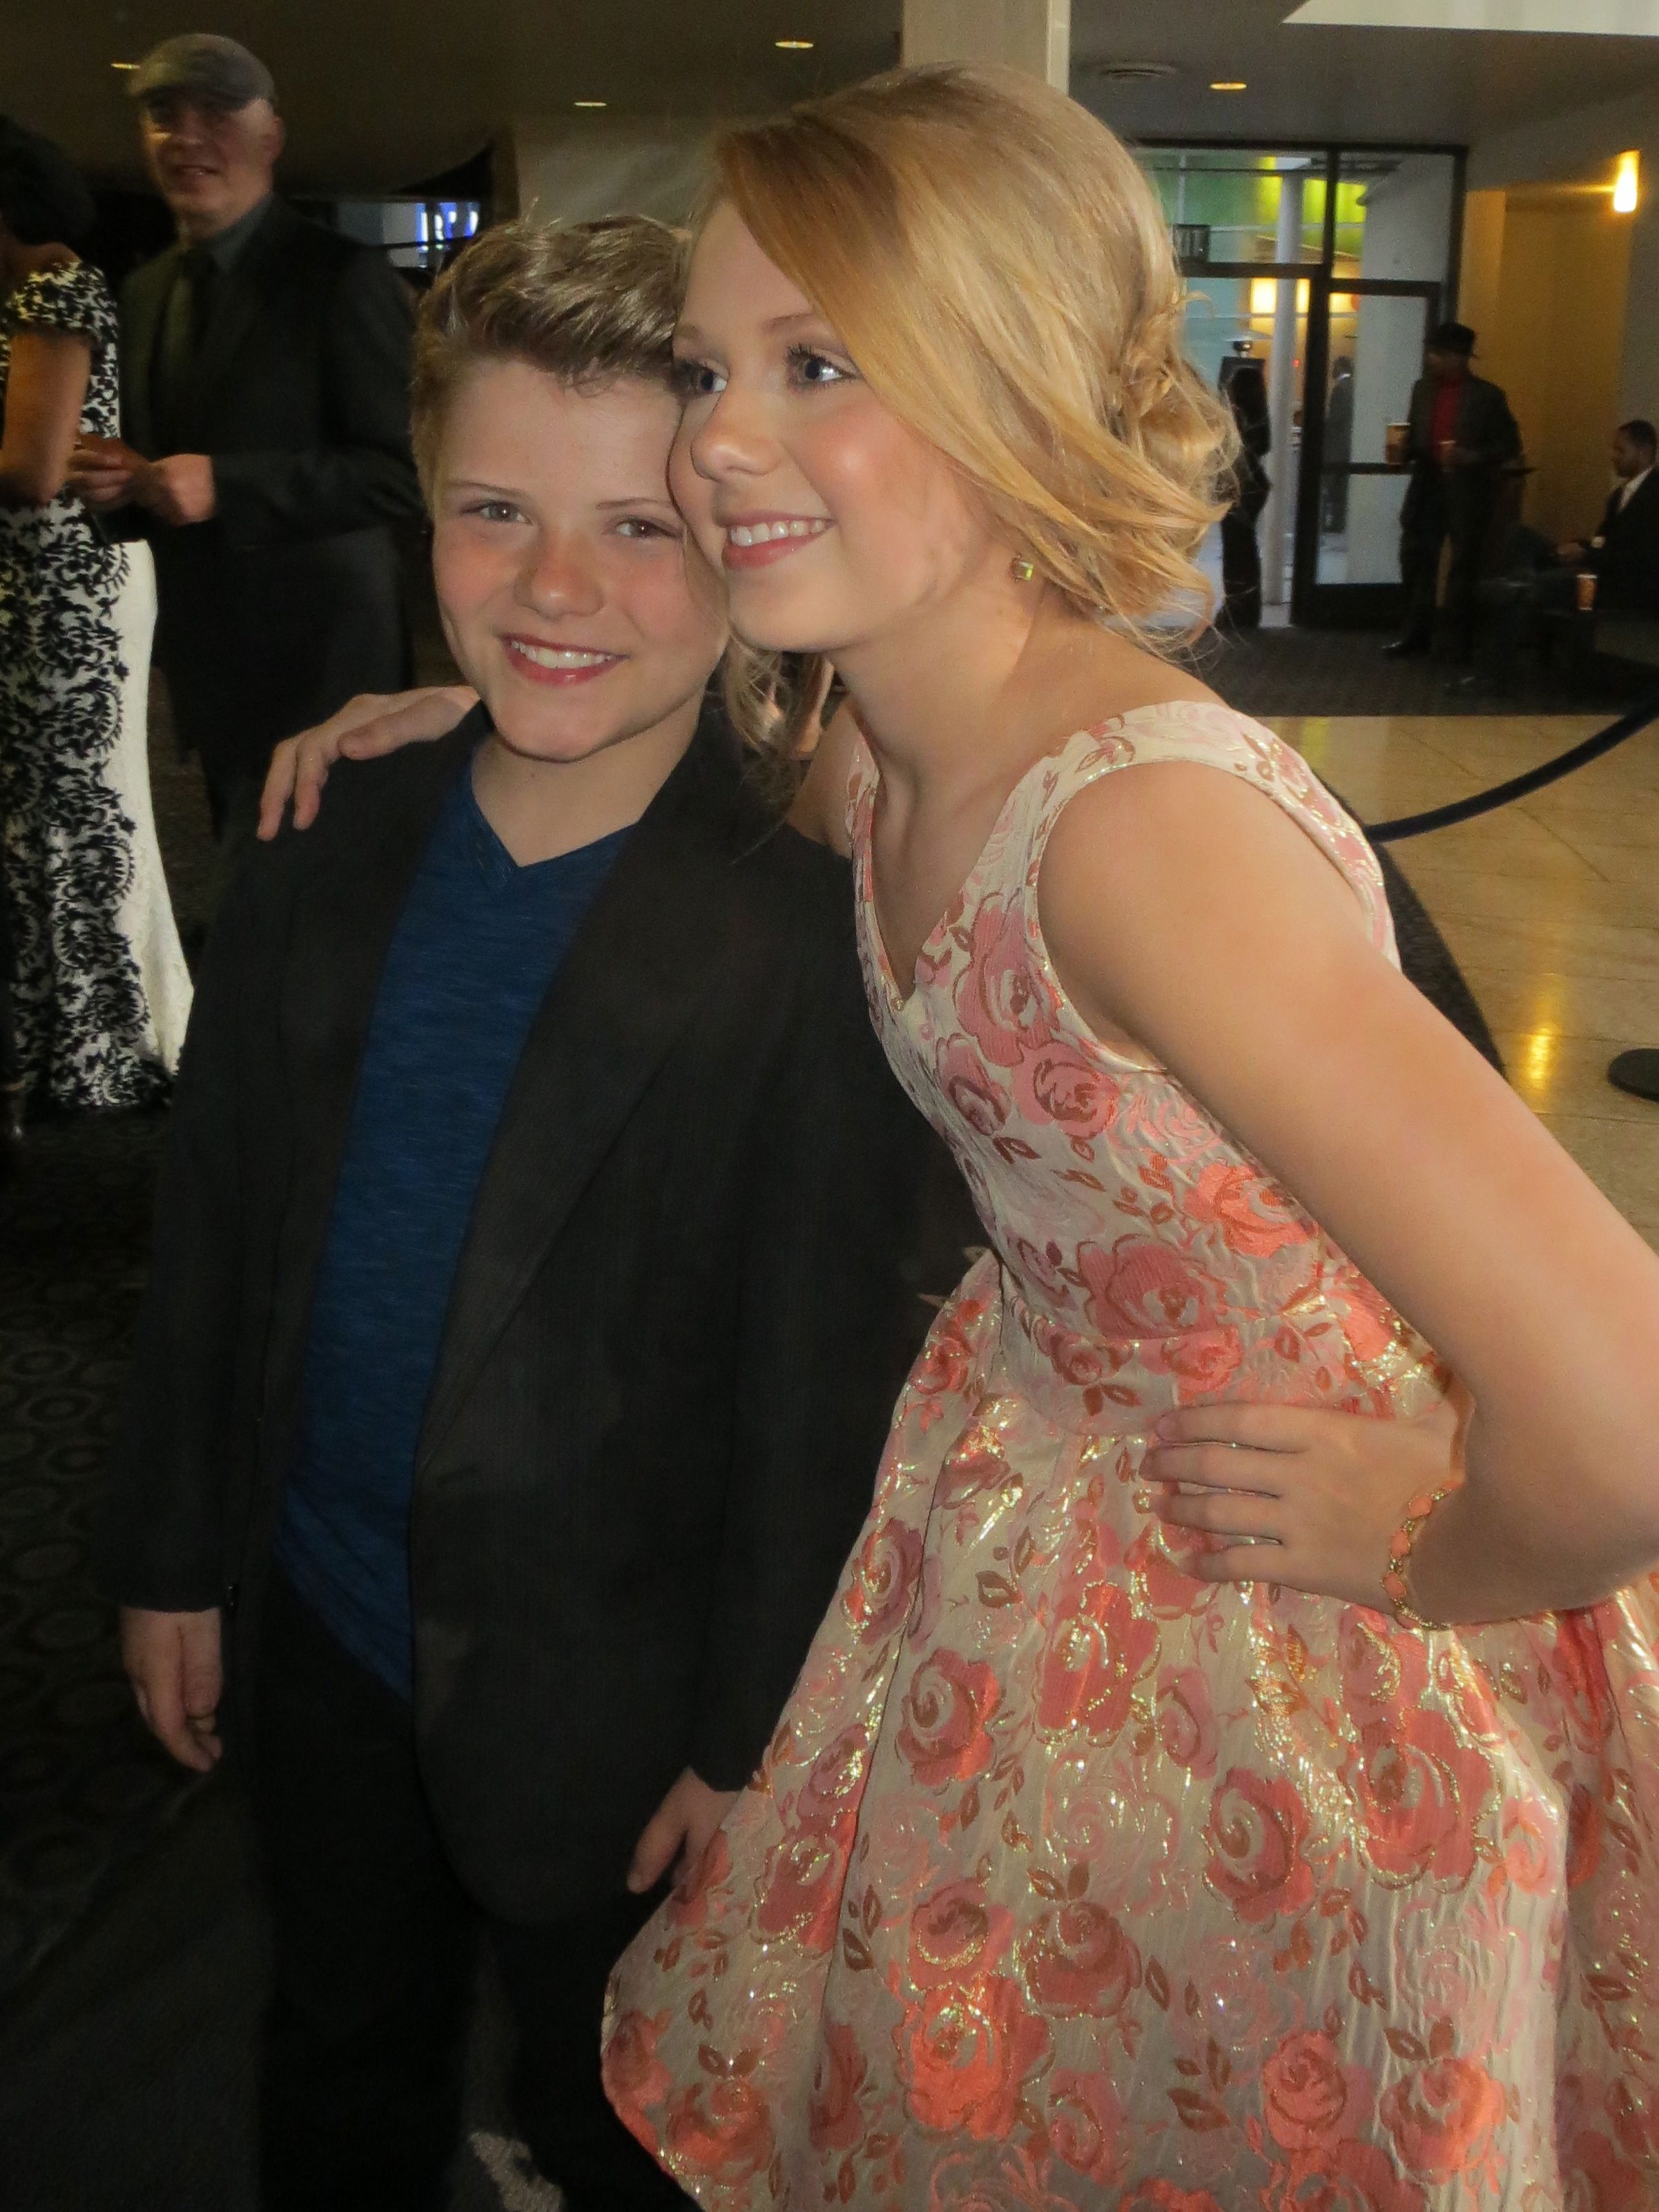 Jake with his sister, Cassie Brennan at premiere of her new film, The Single Moms Club.